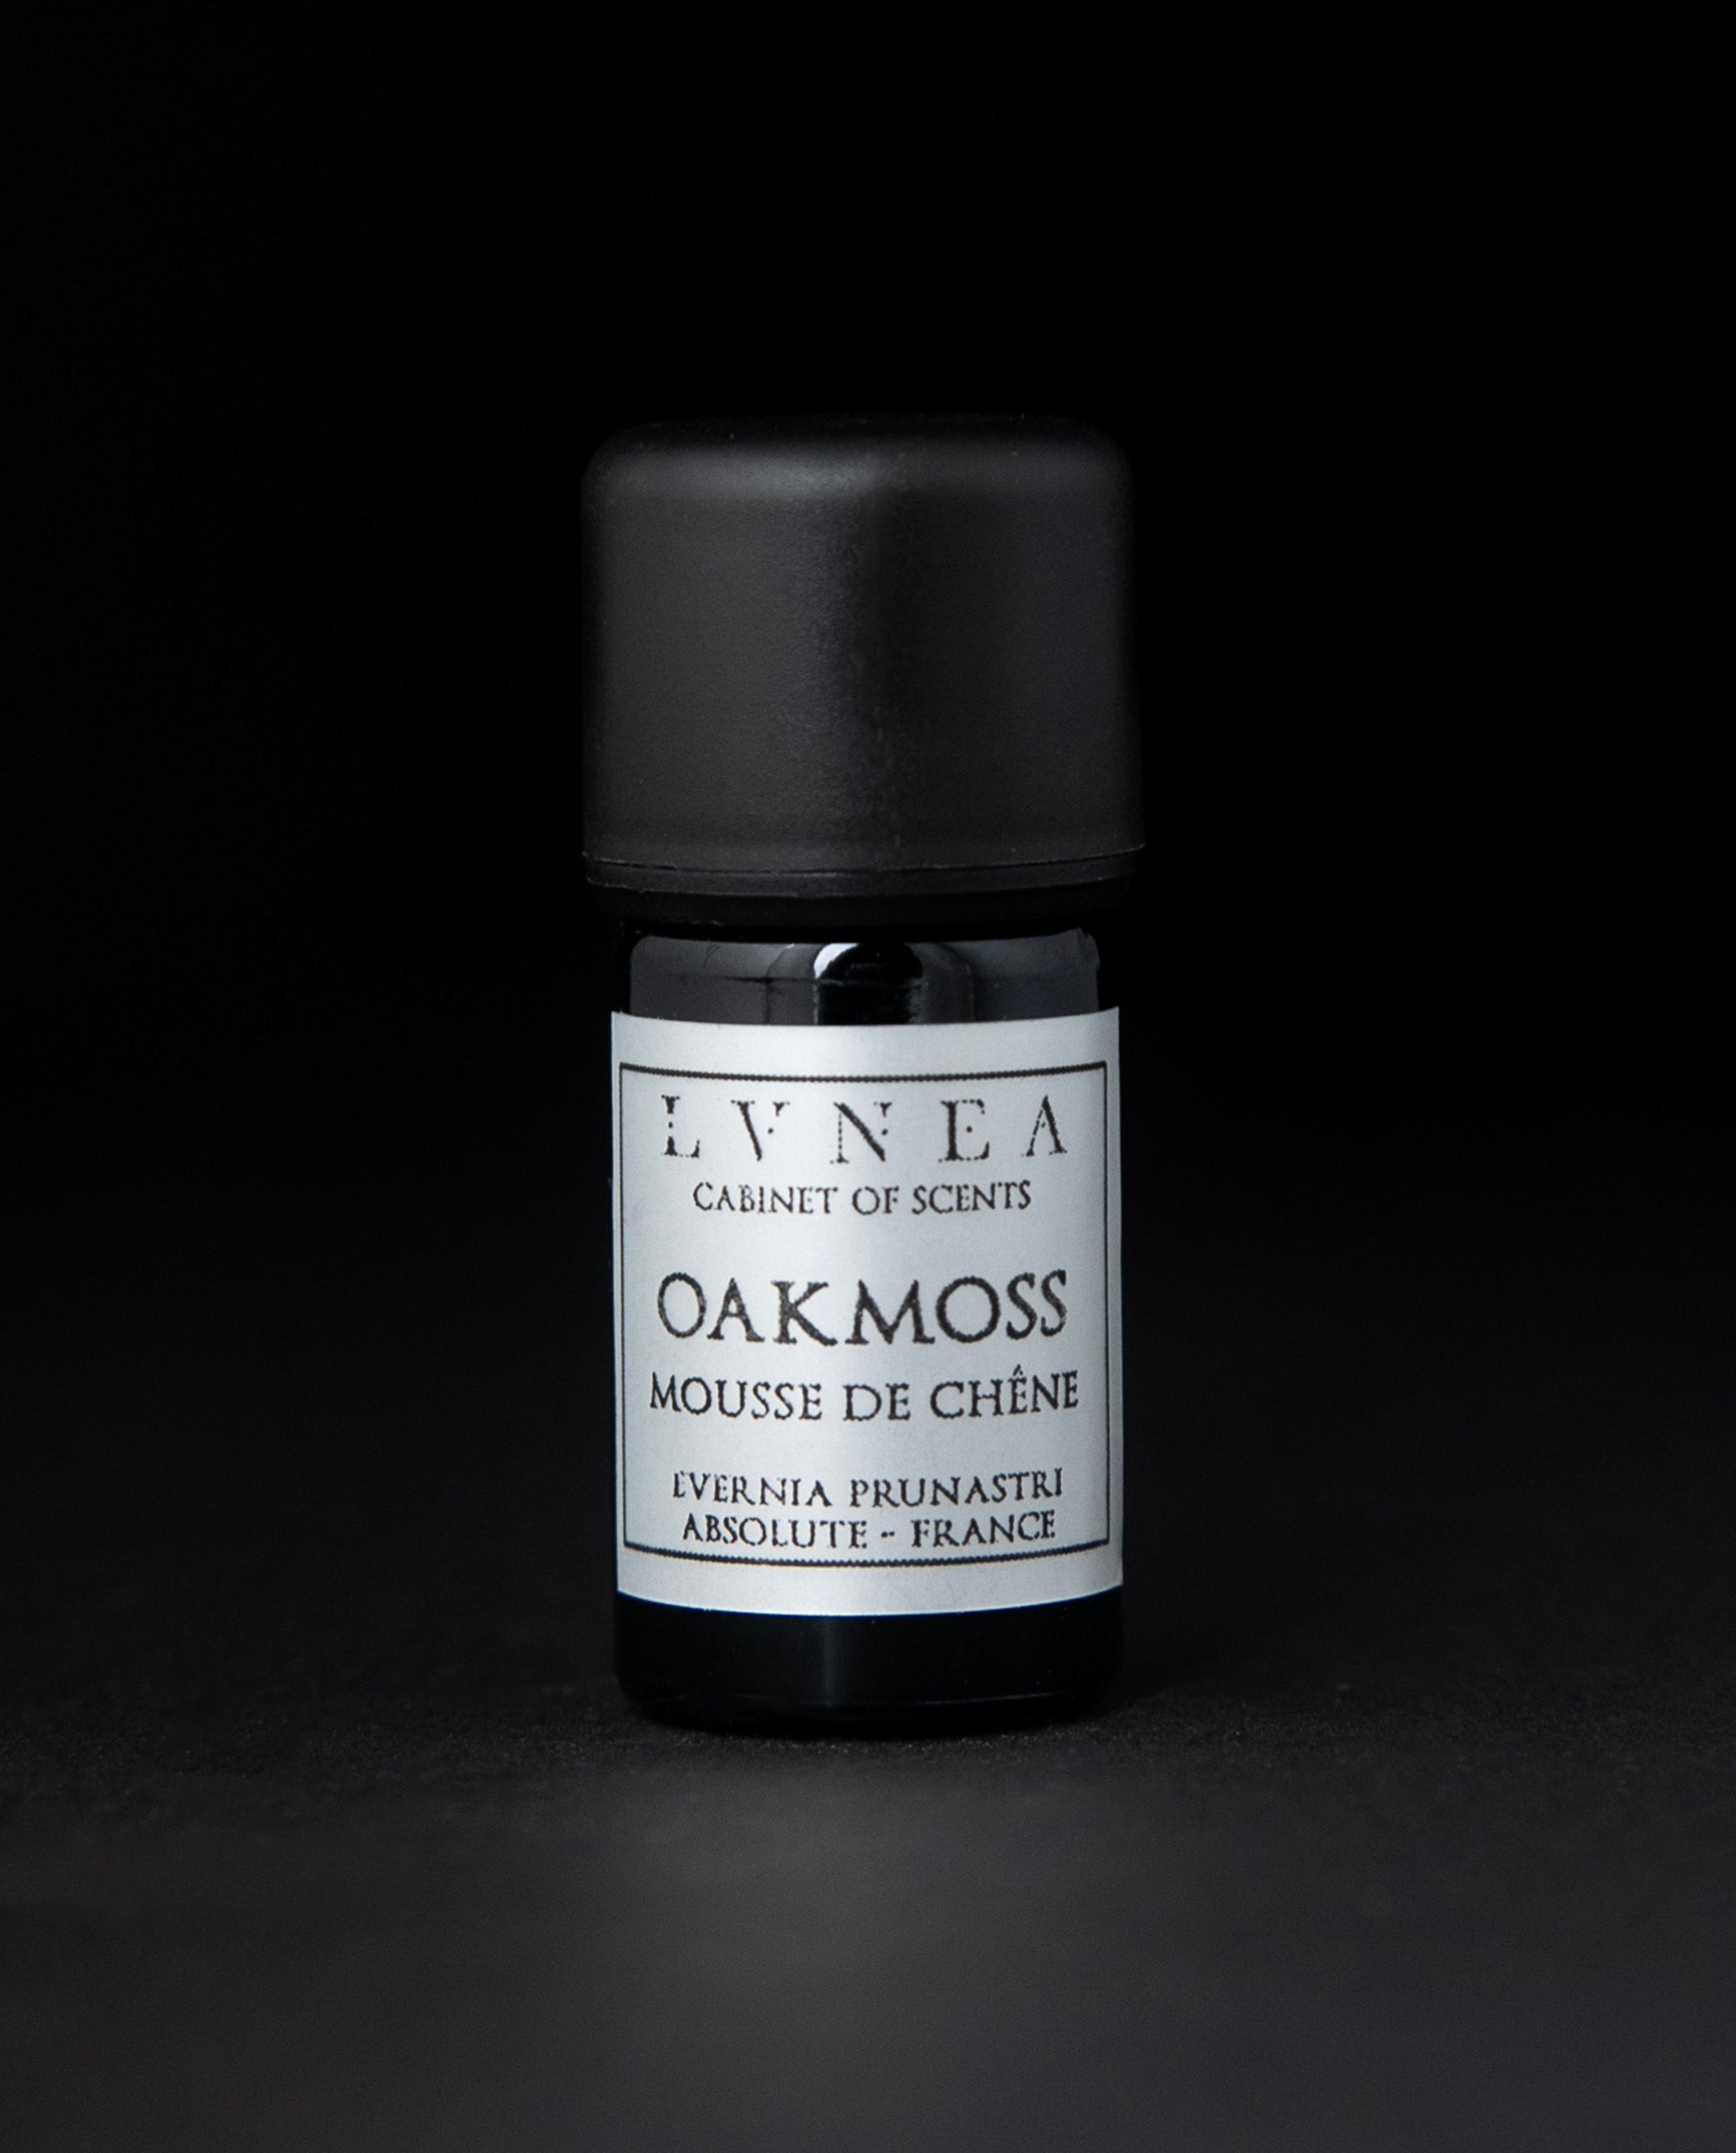 Oakmoss Absolute Oil - Essential Oil Apothecary